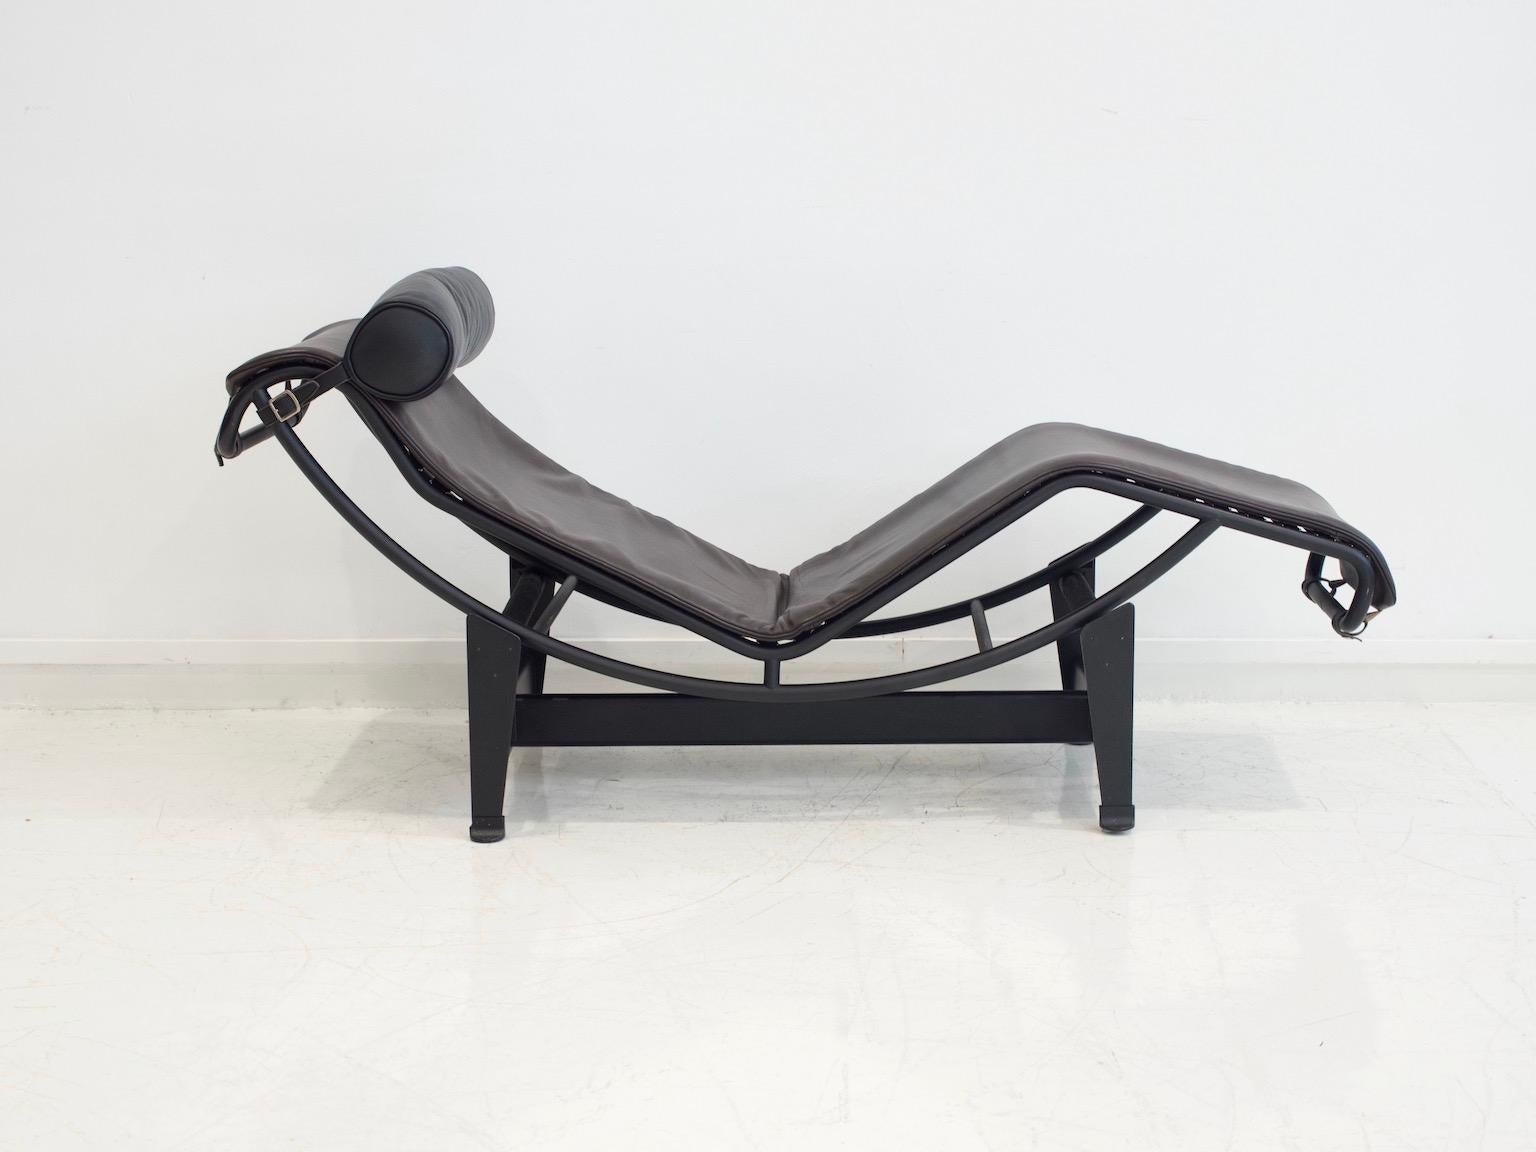 Lounger 'LC 4' is Cassina’s quintessential chaise longue, designed in 1928, and based on an in-depth exploration of reclining chairs. Le Corbusier, Charlotte Perriand and Pierre Jeanneret created this version of the chaise longue in 1965, which was